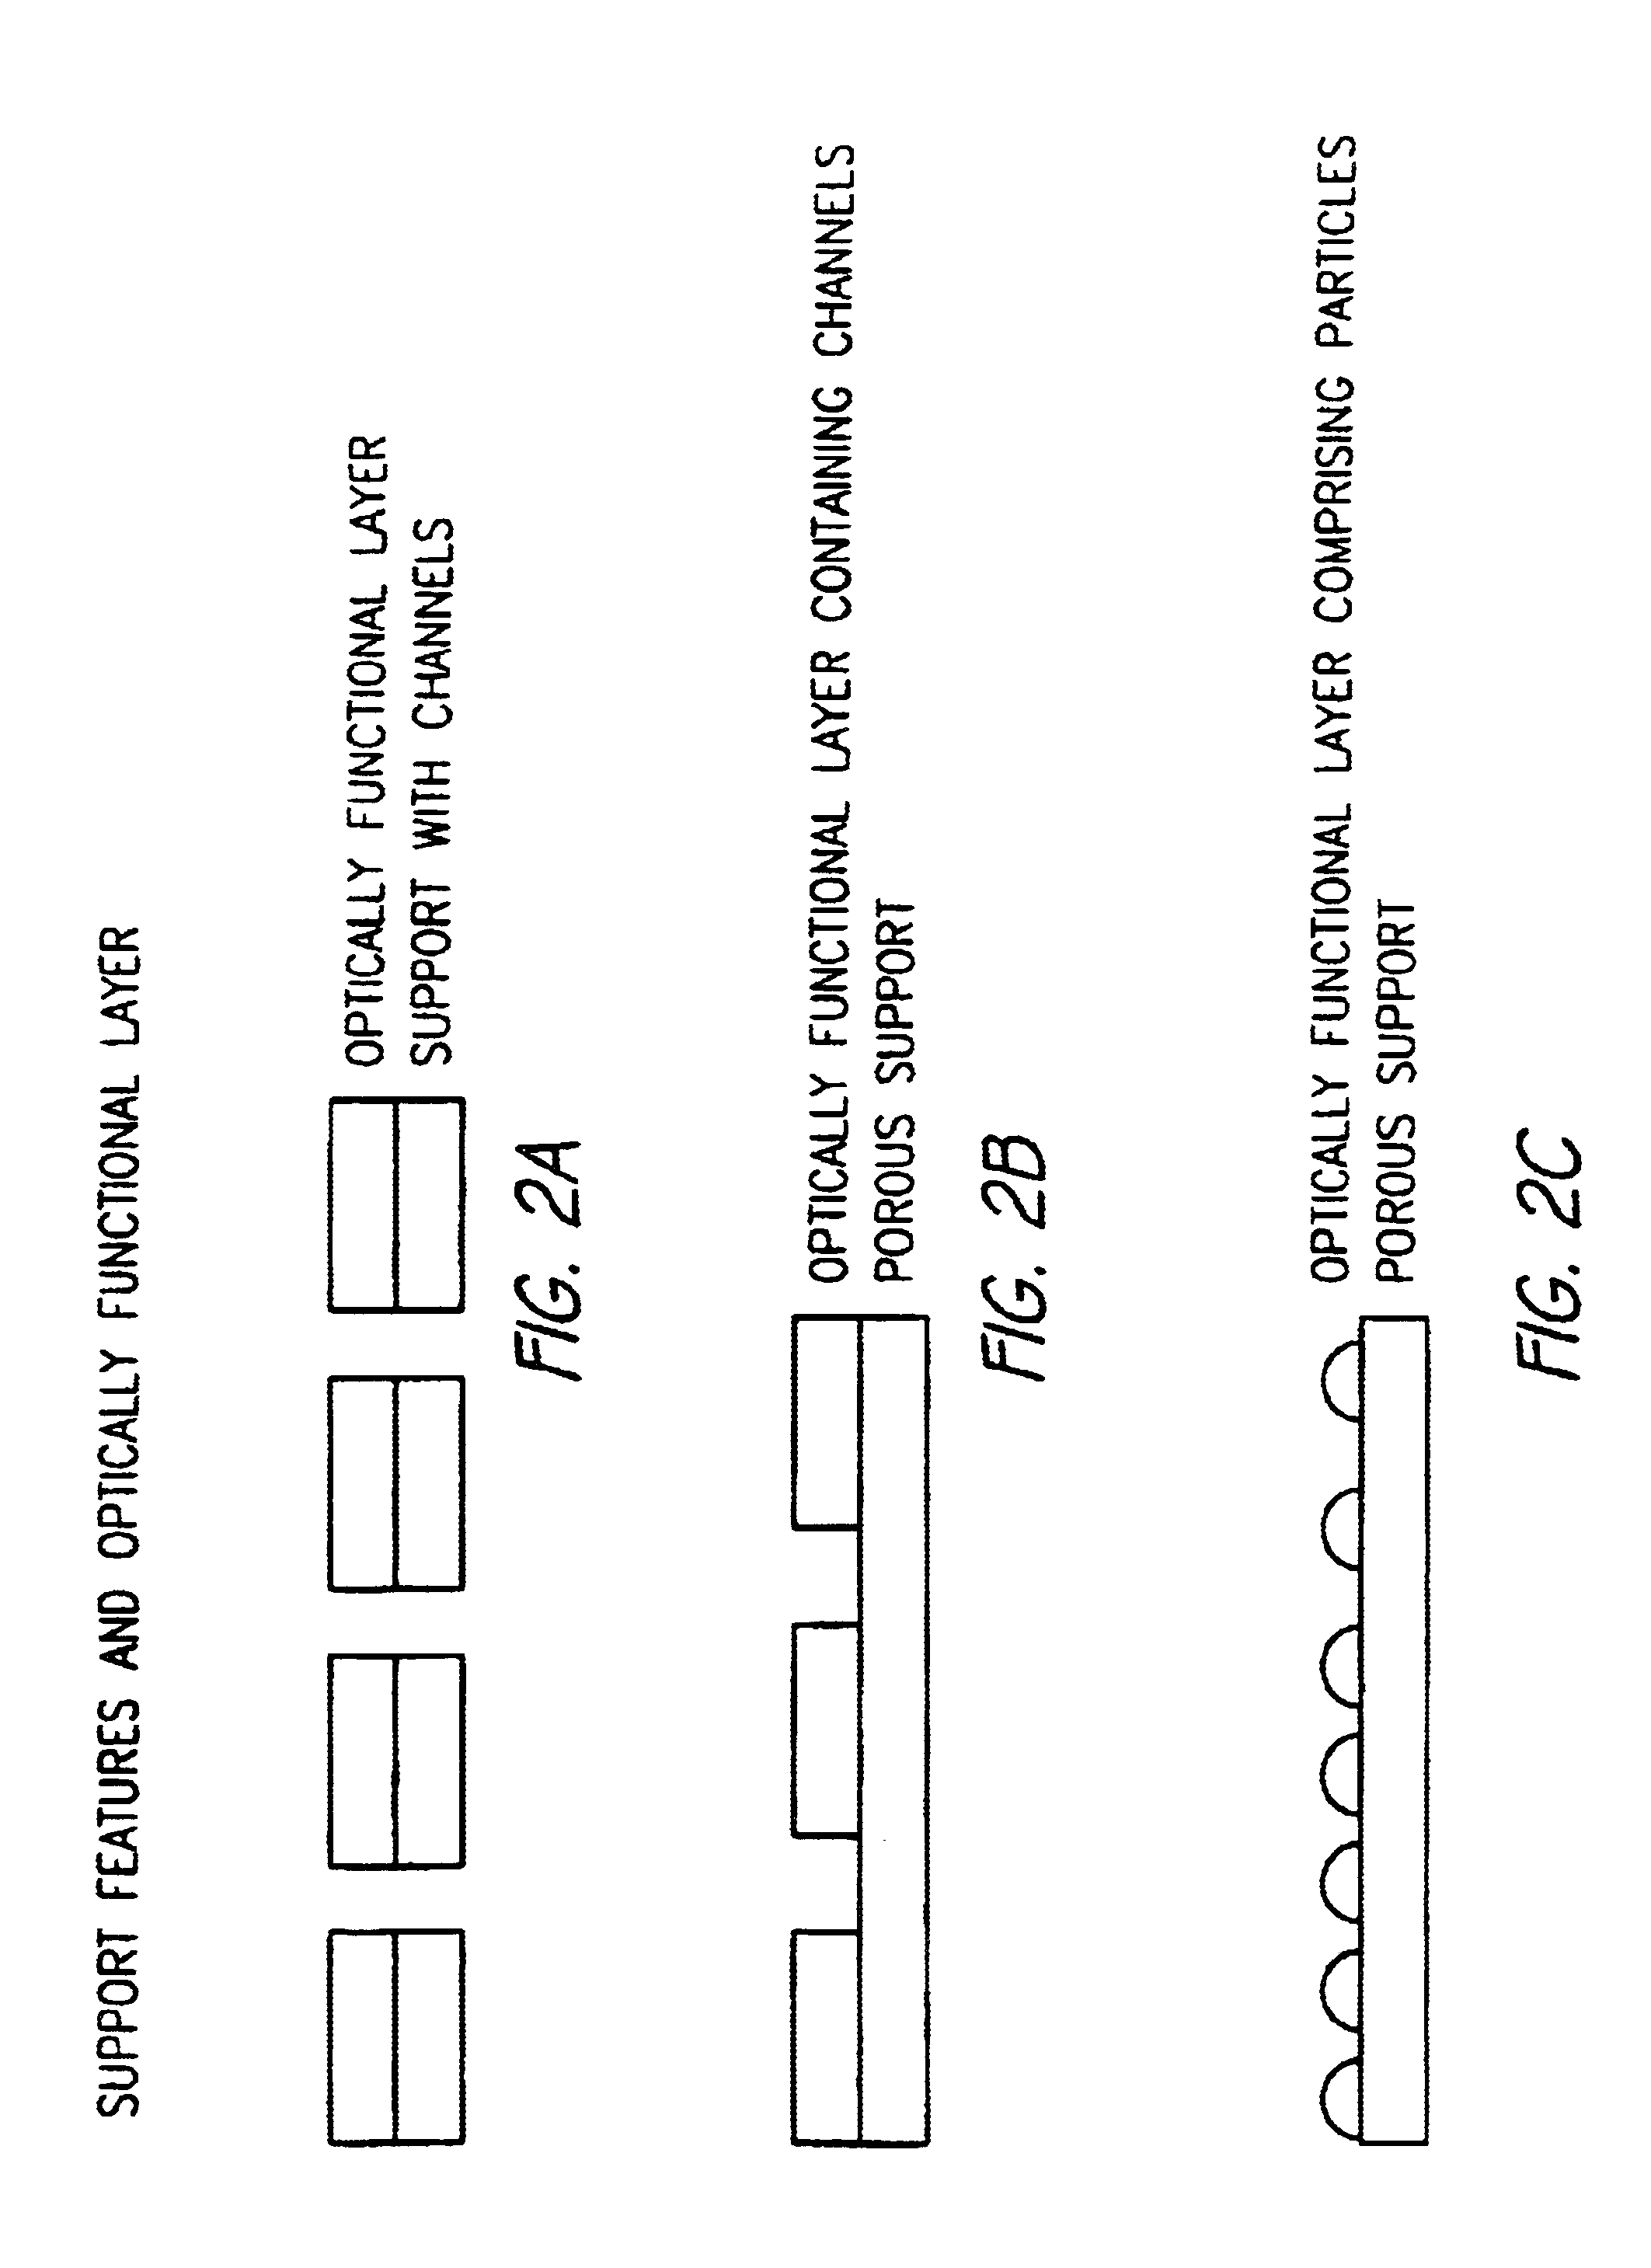 Device for mass transport assisted optical assays